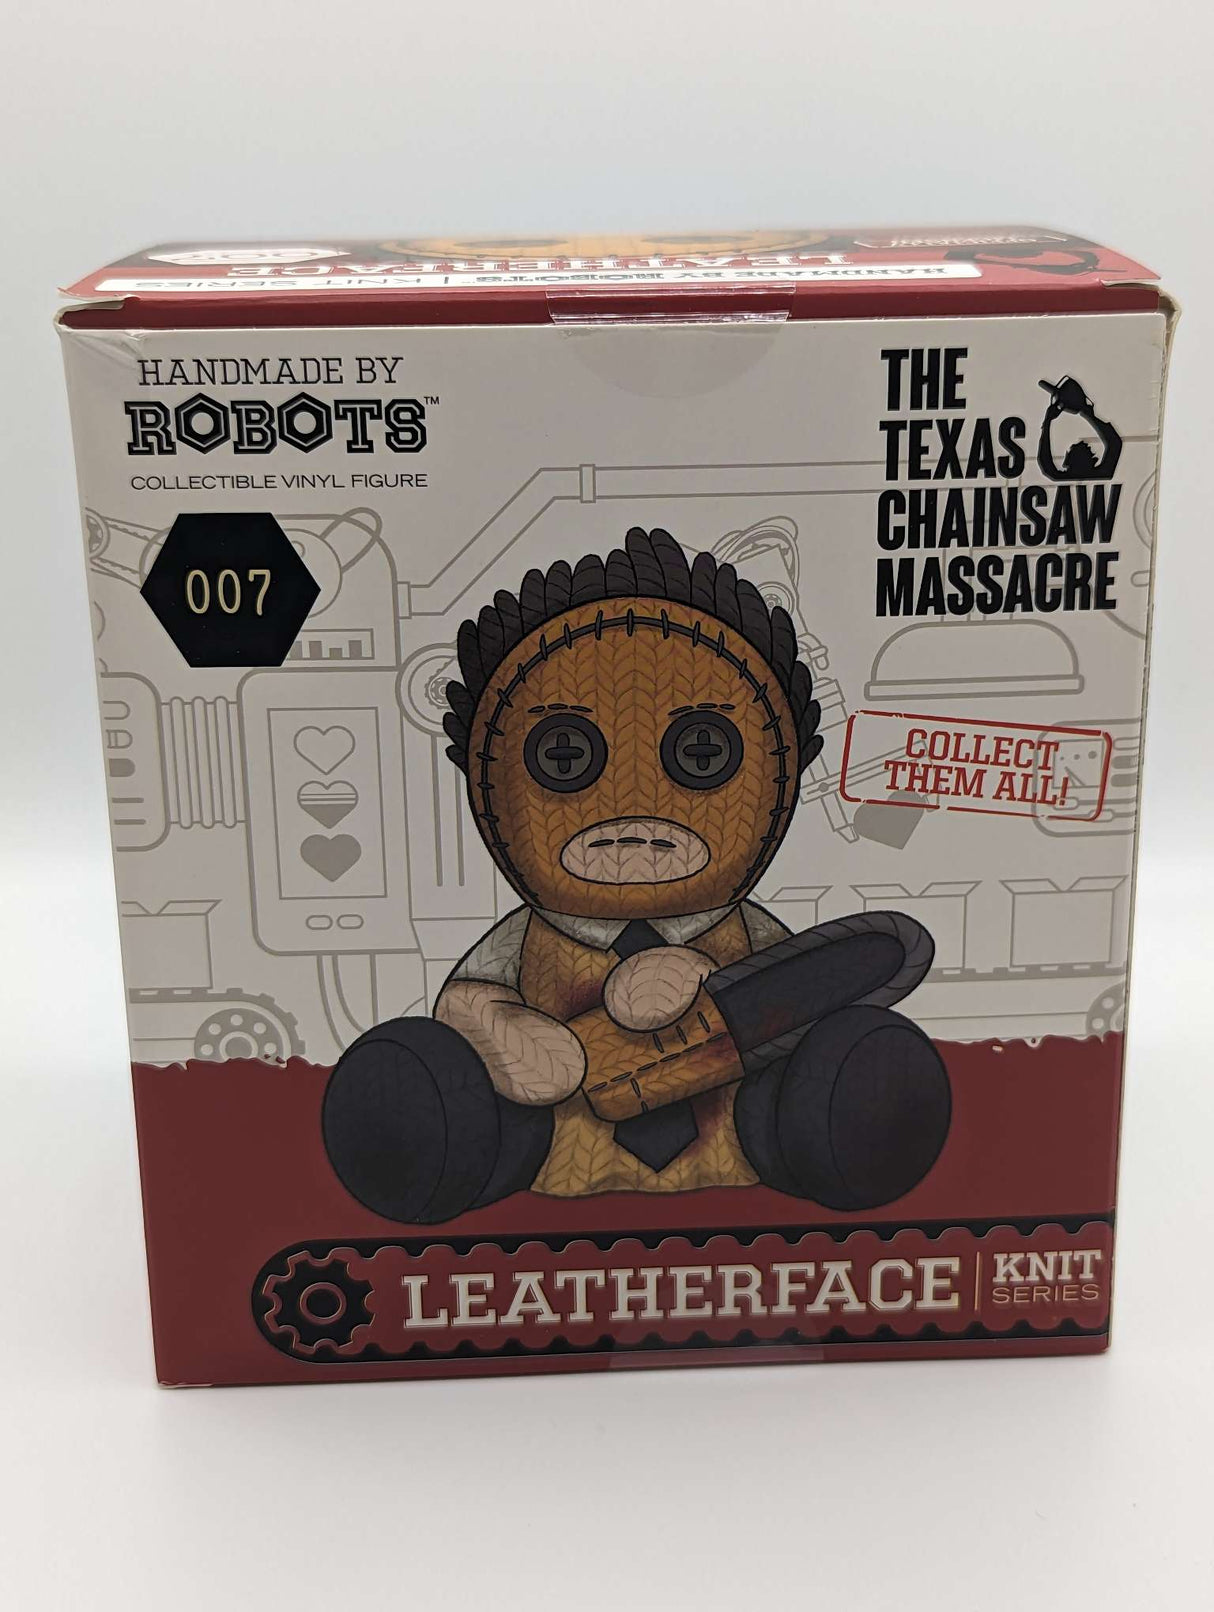 Handmade by Robots | The Texas Chainsaw Massacre | Leatherface Vinyl Figure | Knit Series #007